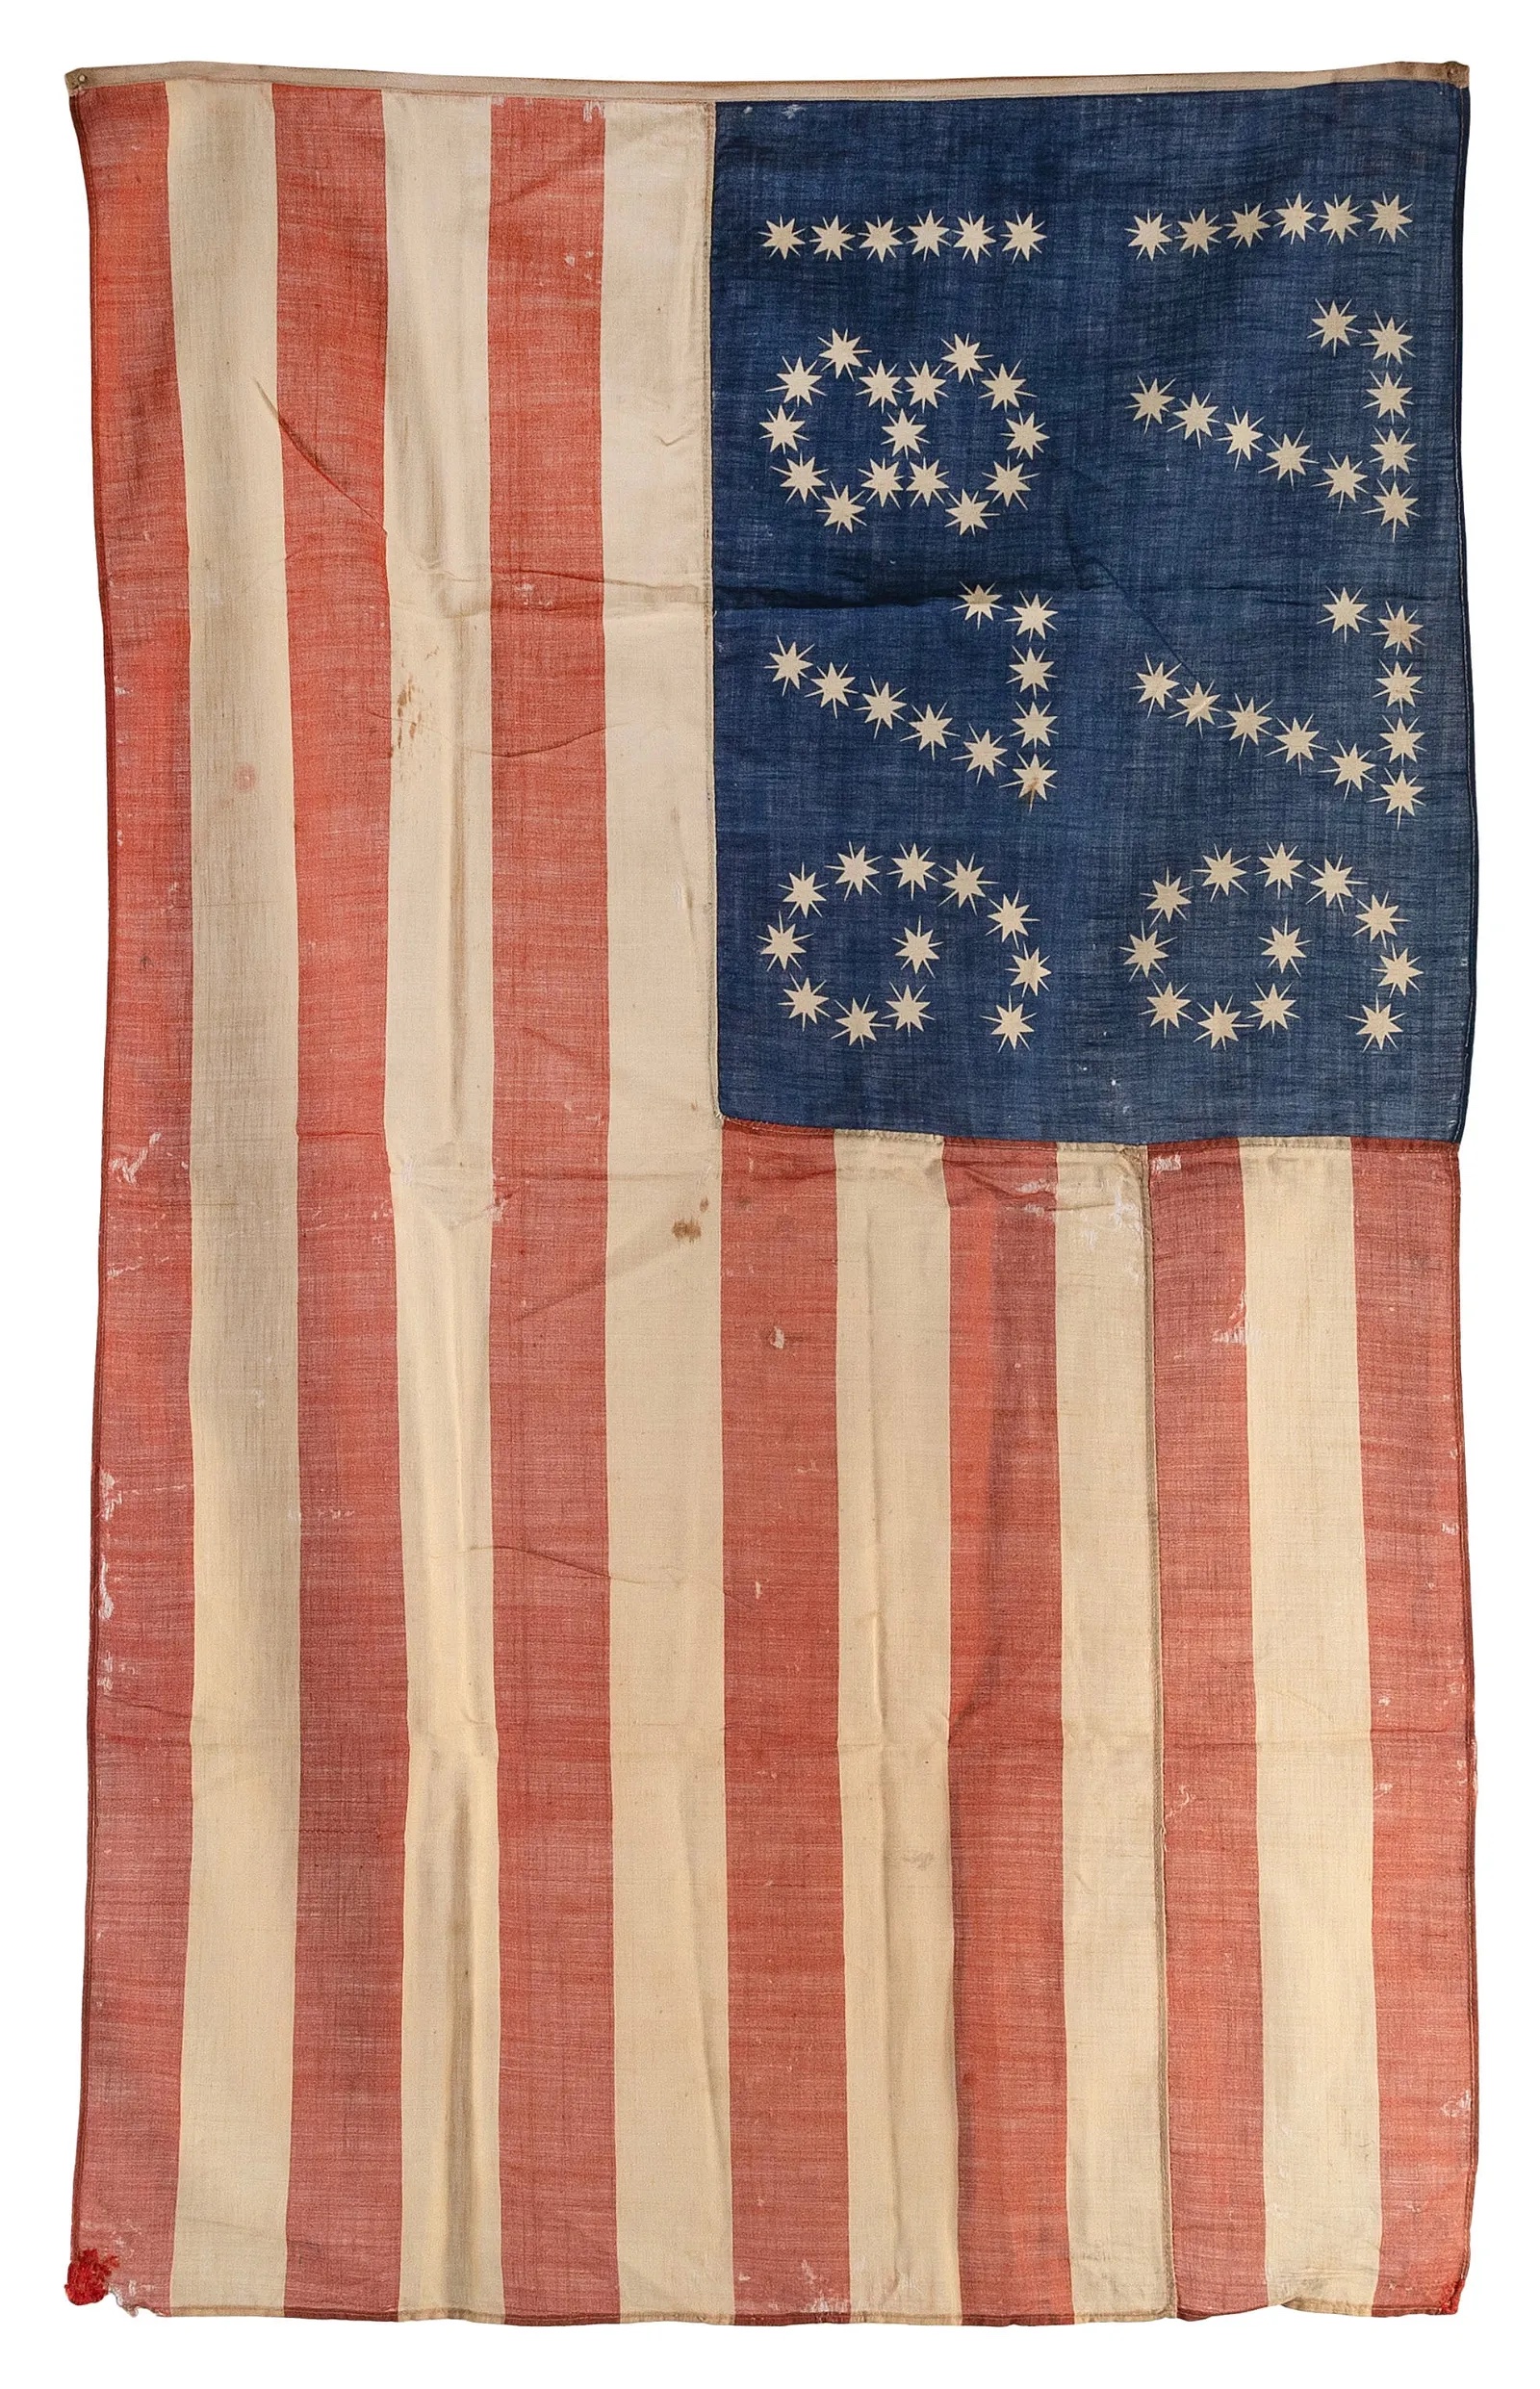 1876 United States centennial flag, estimated at $4,000-$7,000 at Eldred's.